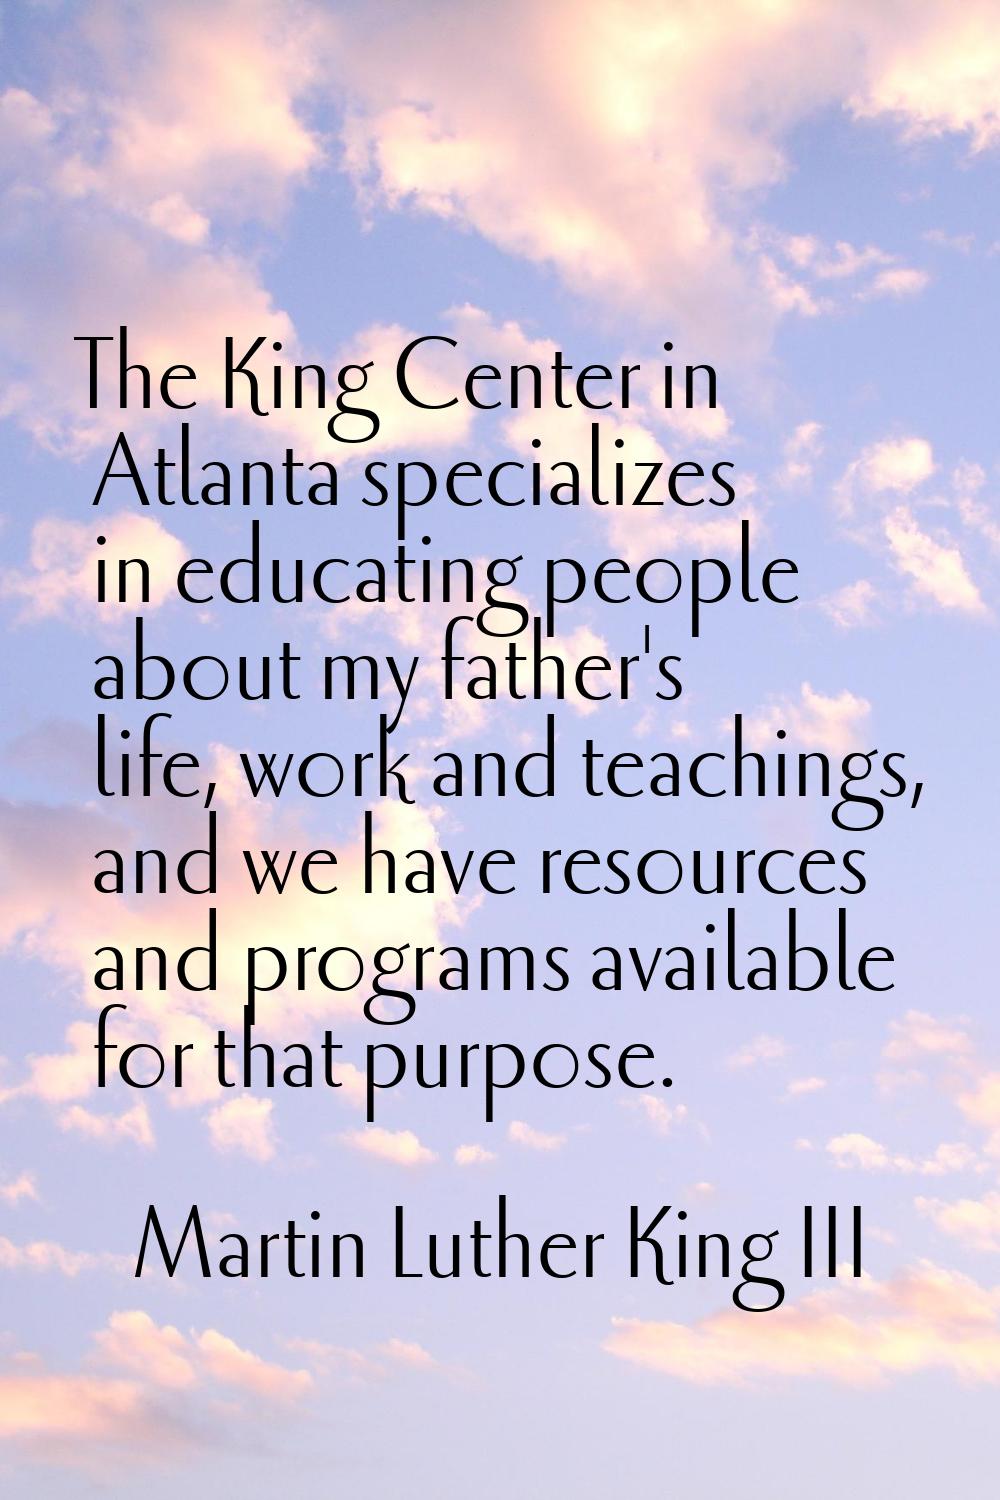 The King Center in Atlanta specializes in educating people about my father's life, work and teachin